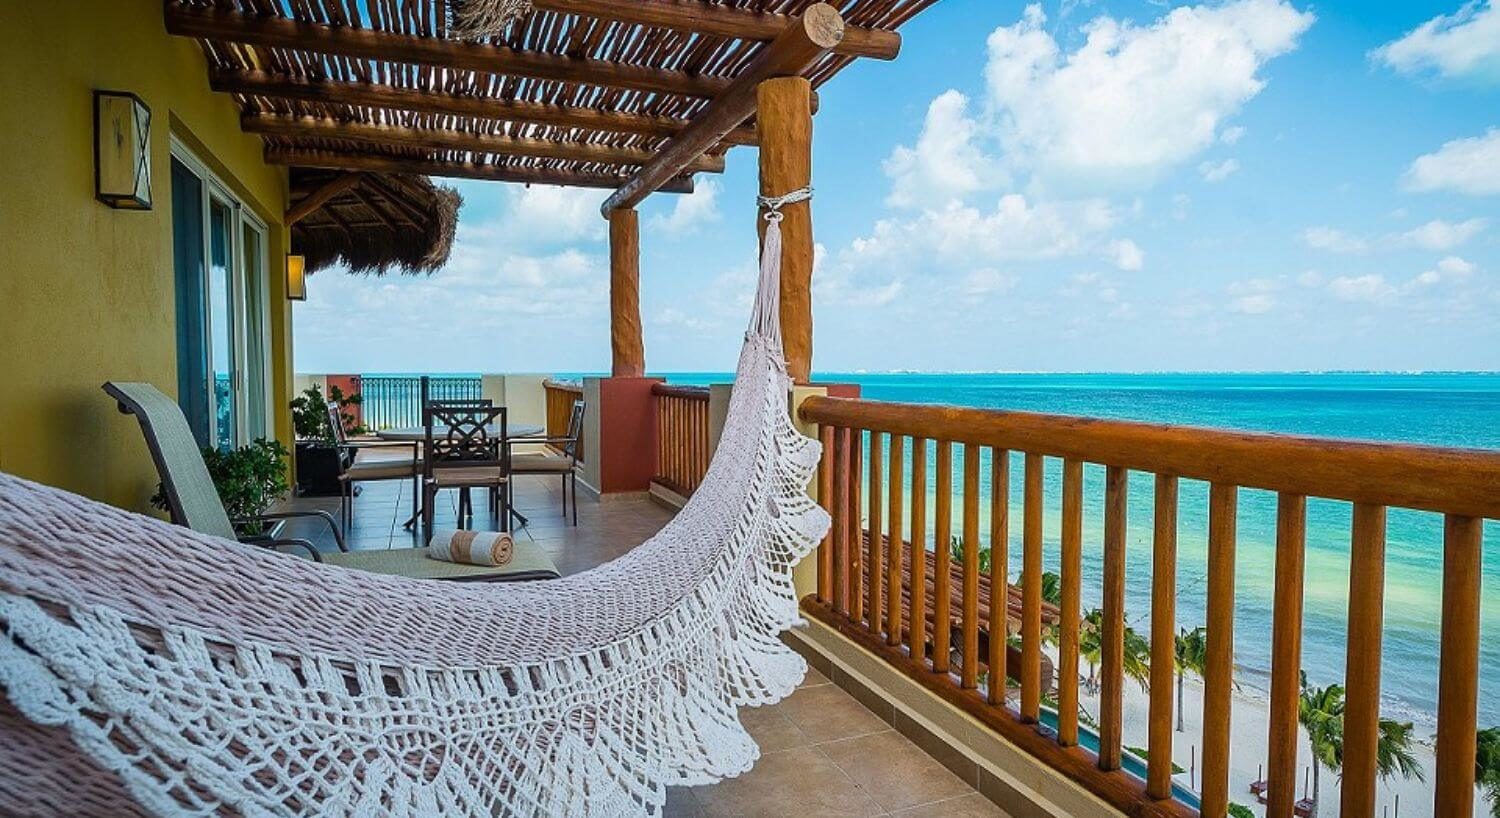 A long balcony with outdoor patio furniture, a hammock, lounge chairs, wood railings, and sweeping turquoise ocean views.